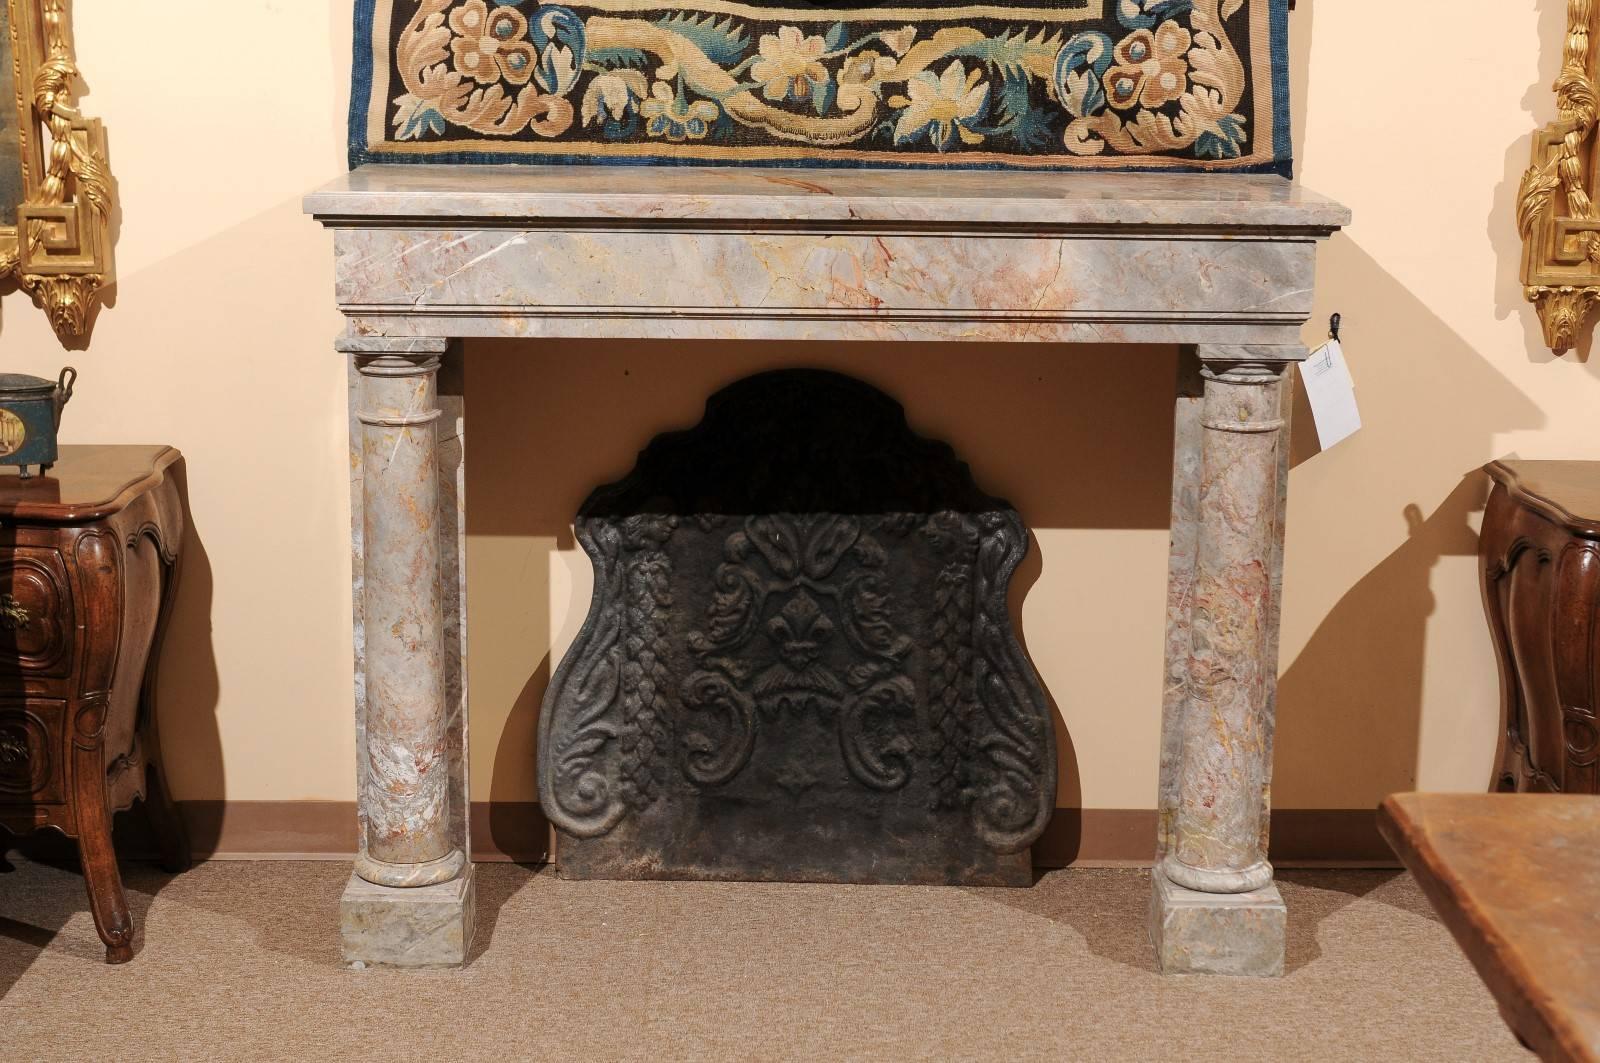 Large Neoclassical Style Marble Mantel featuring Column on each side. 19th Century France. Marble is a light gray color with coral colored veining throughout. Interior Measurements:  41